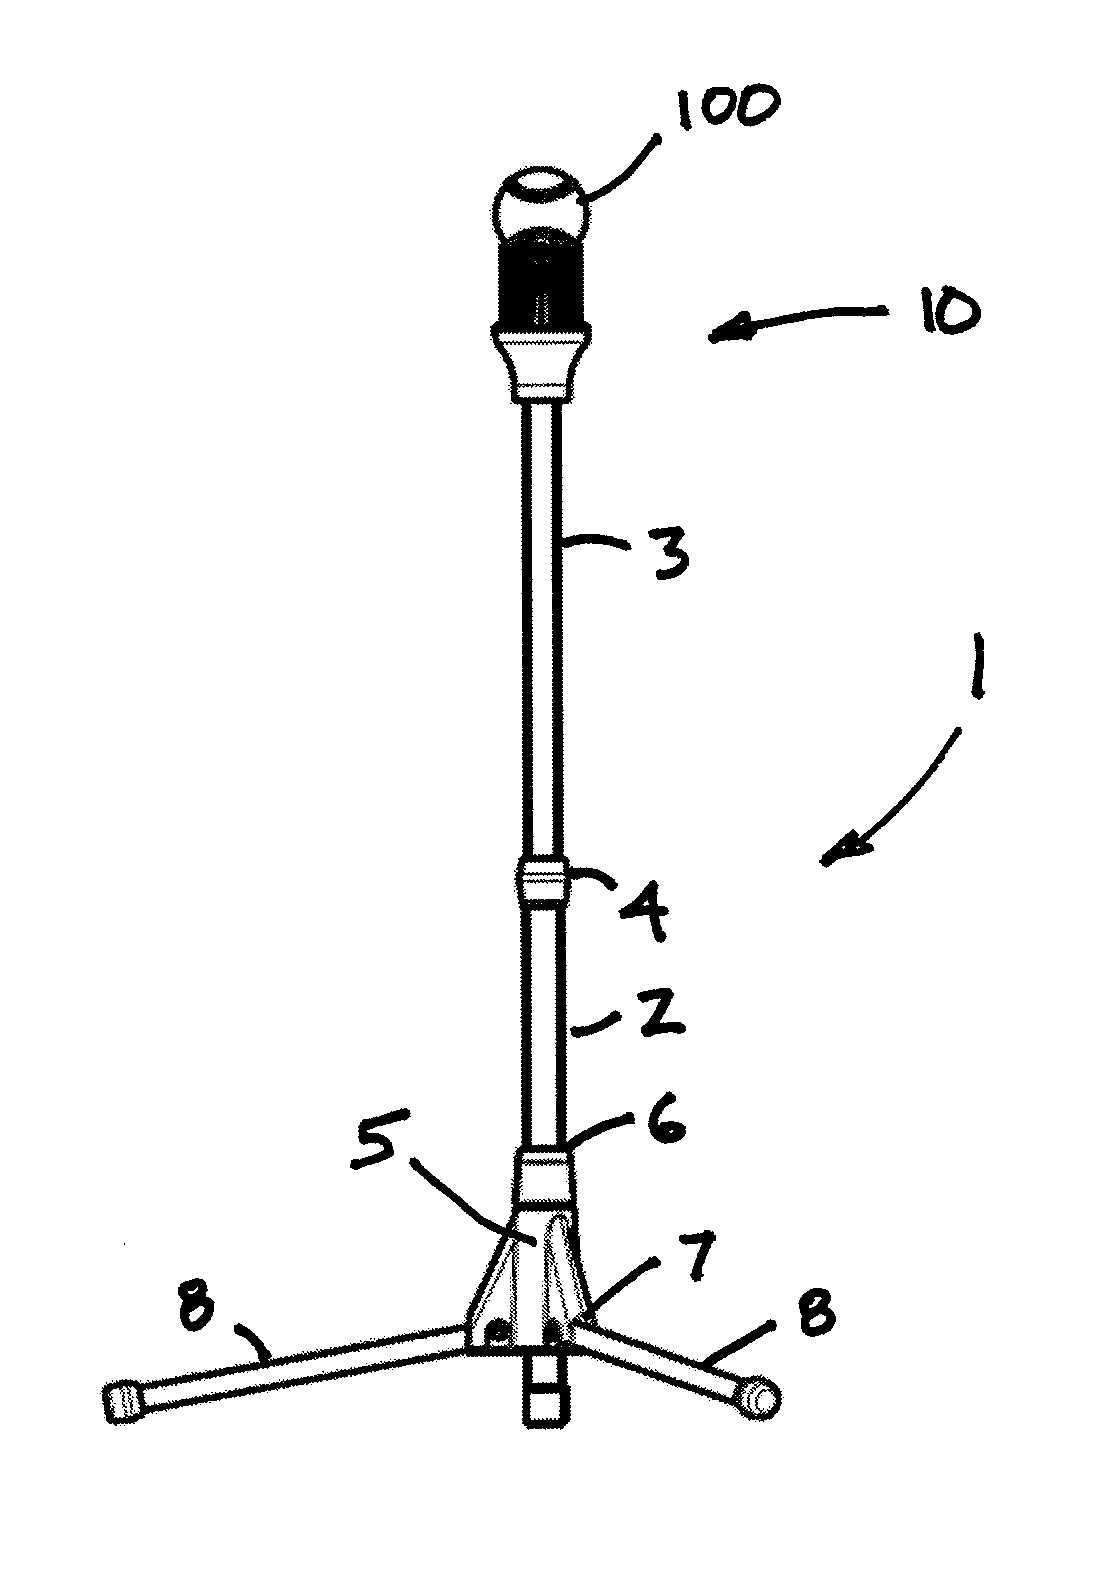 Training device, system and method for improving a baseball player's swing of a baseball bat